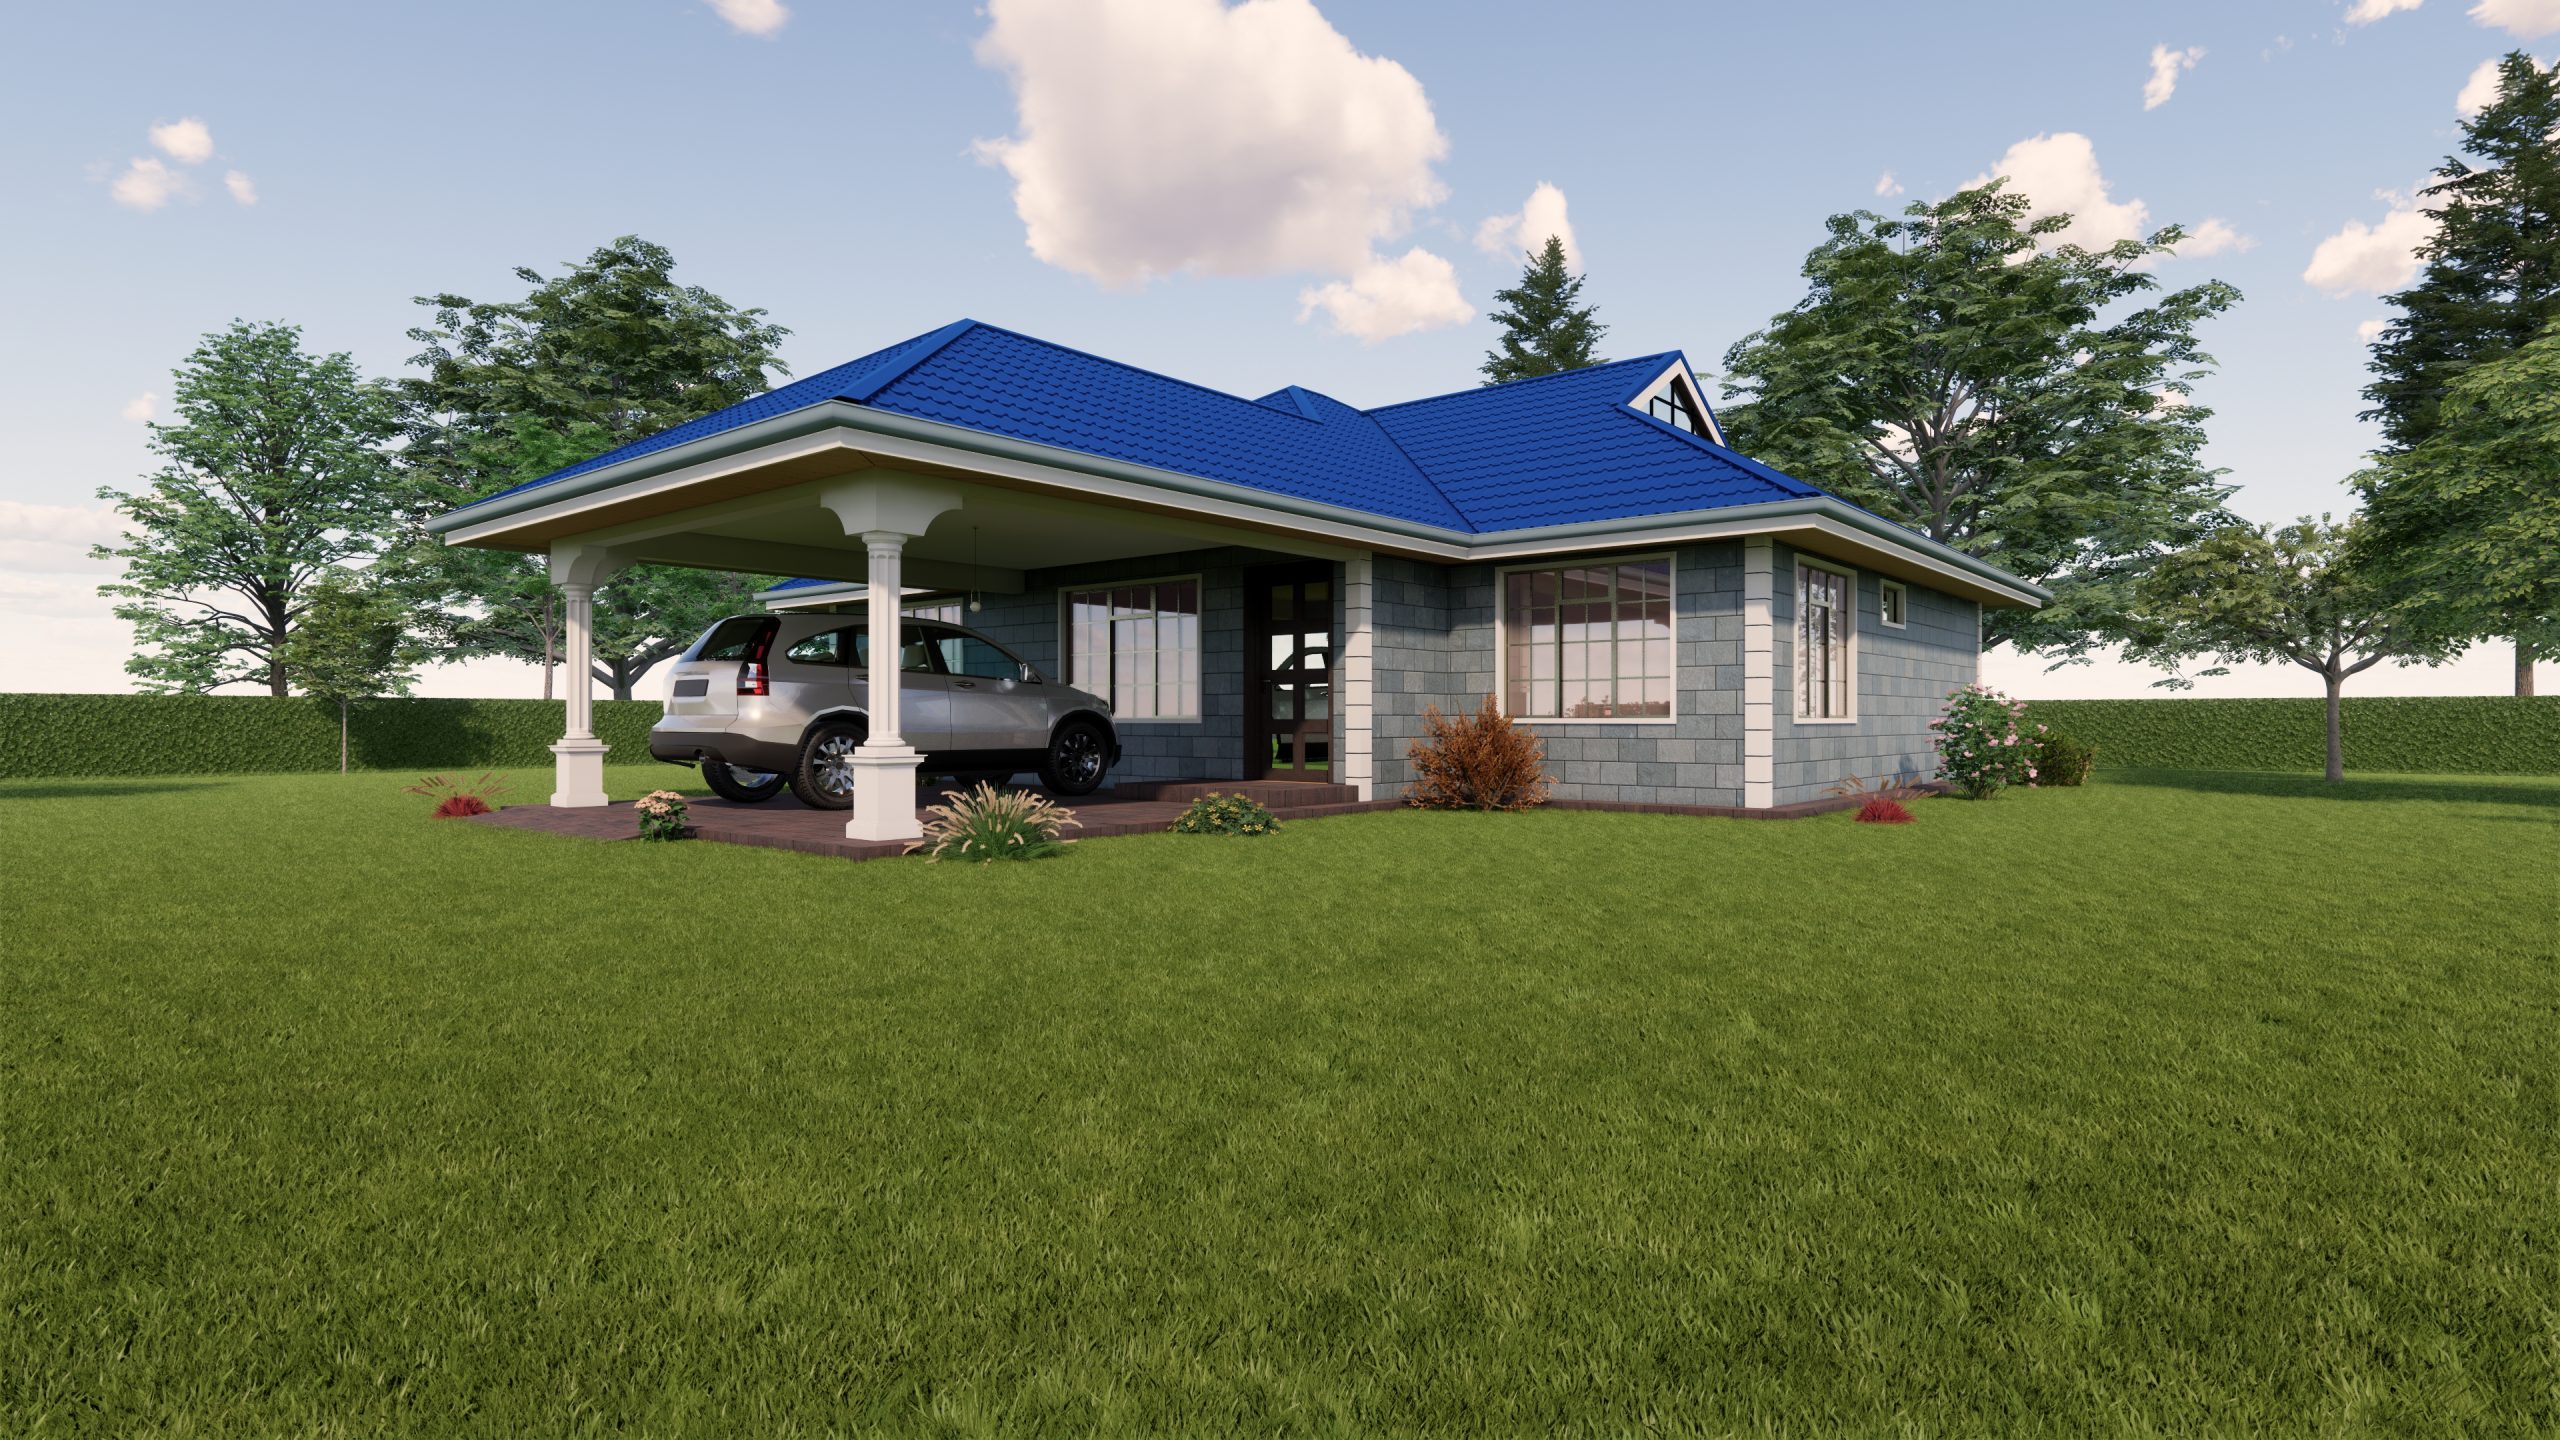 A Beautiful Two Bedroom Bungalow House Plan